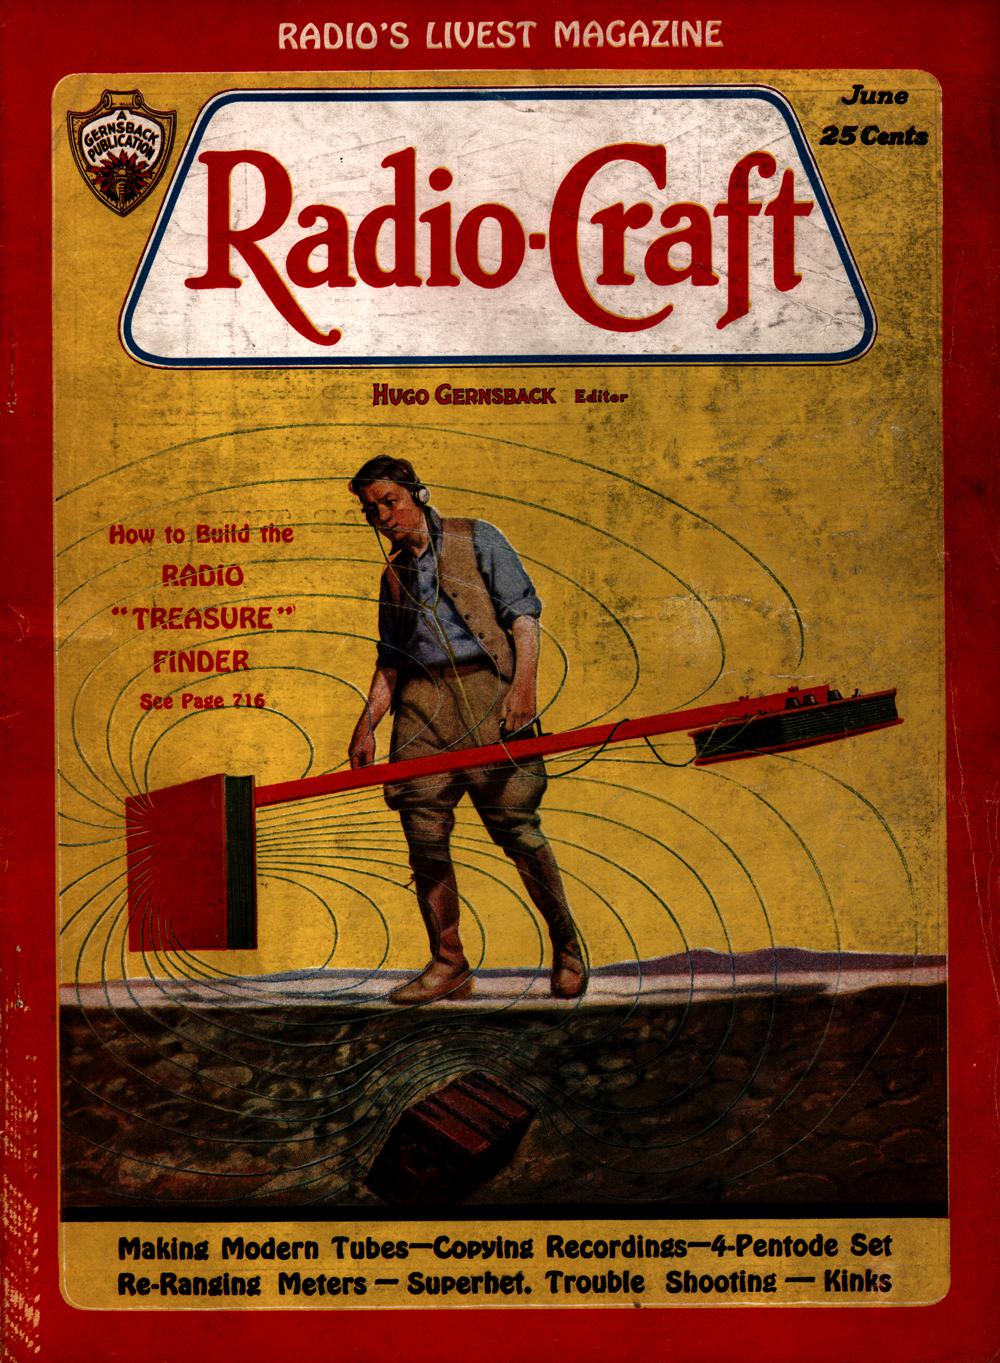 1932 - Radio-craft. and popular electronics; radio-electronics in all its phases - Vol. 3, No. 12